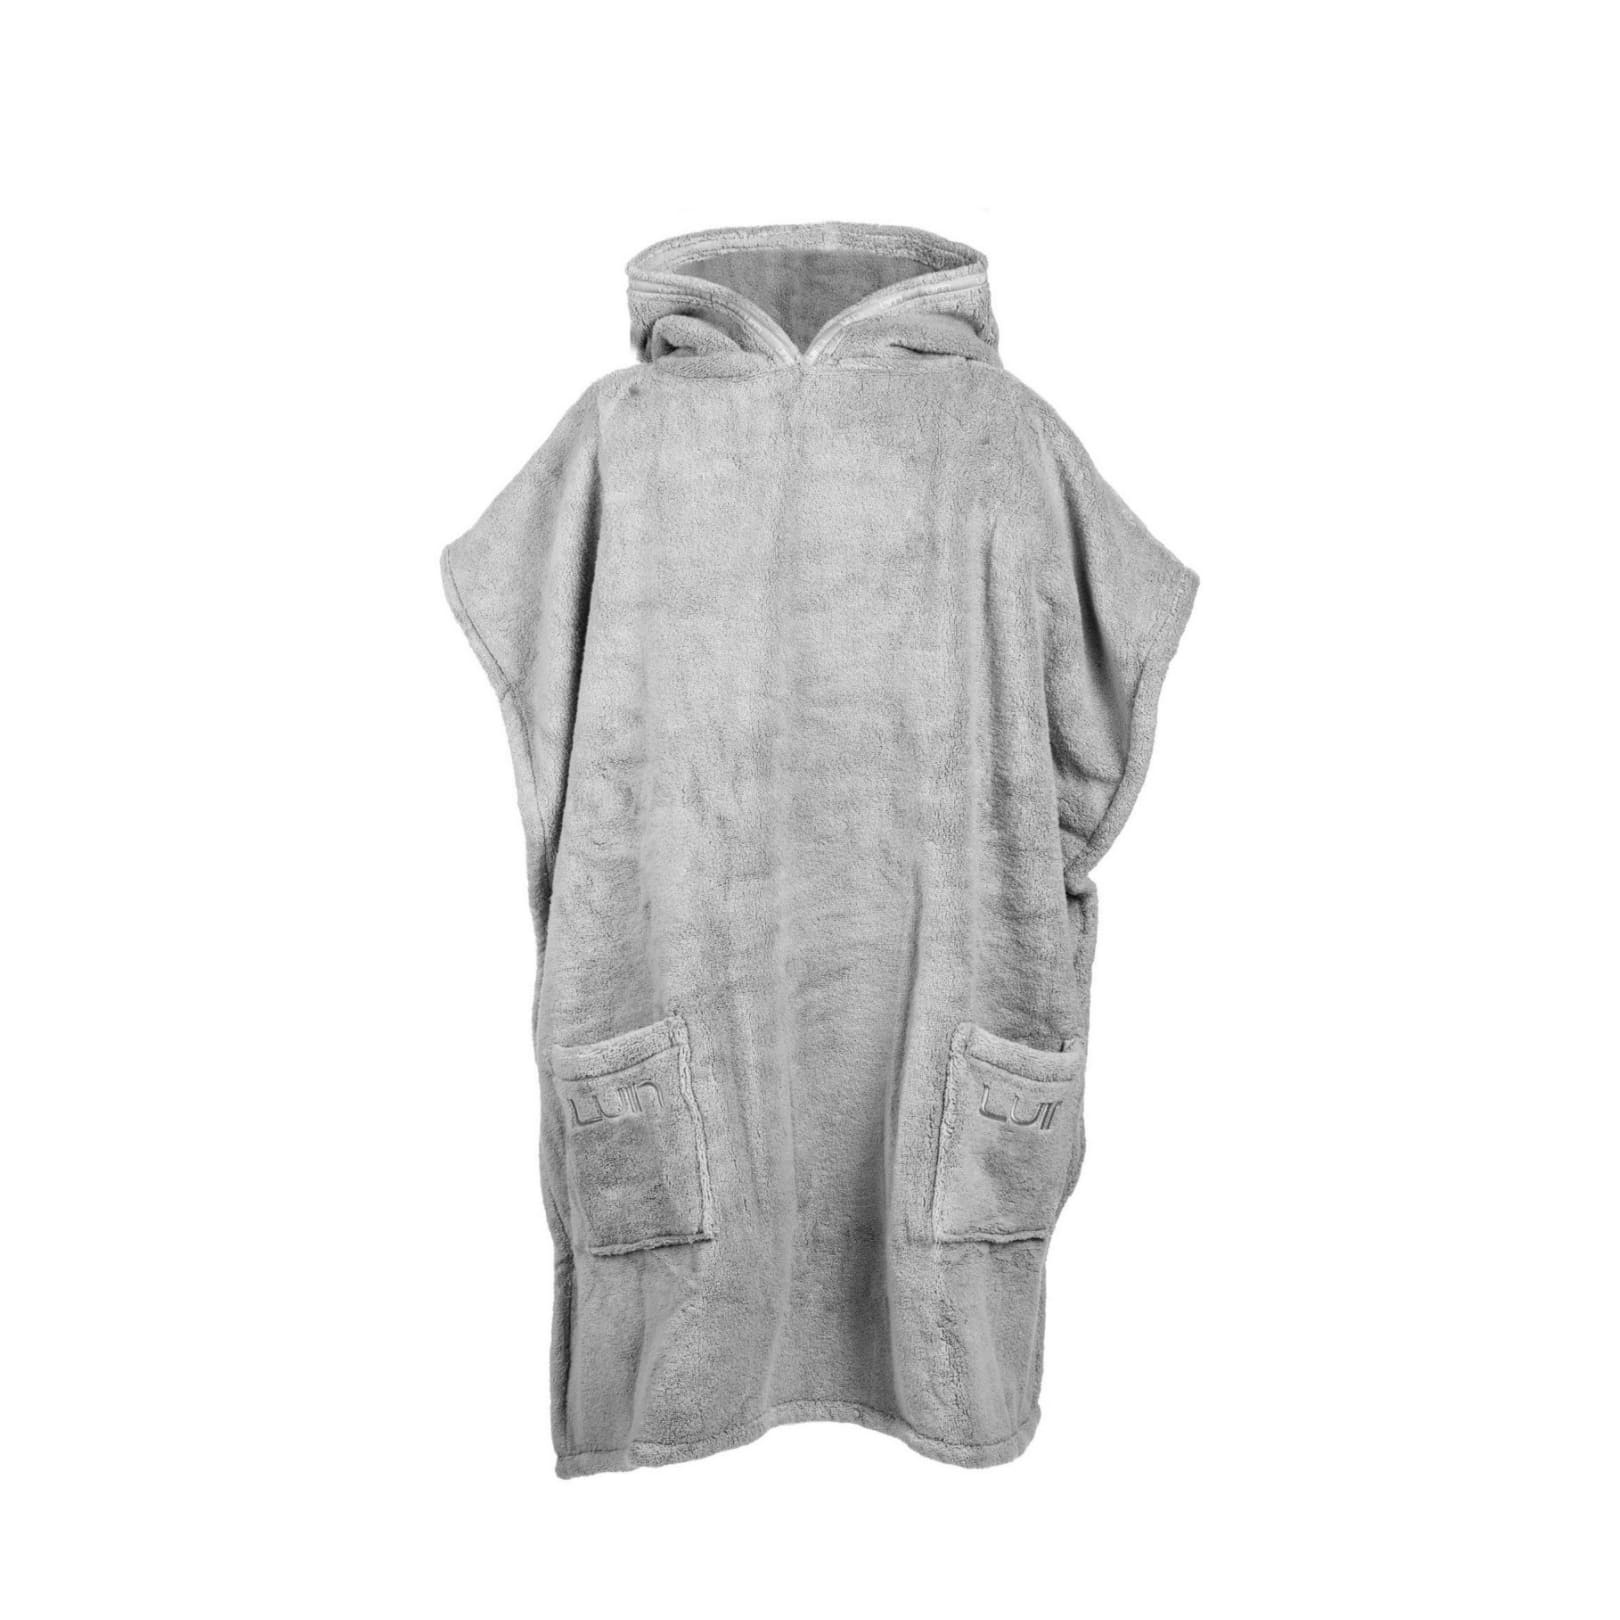 Poncho towel pearl unisex grey Luin Living Your Home Your Spa